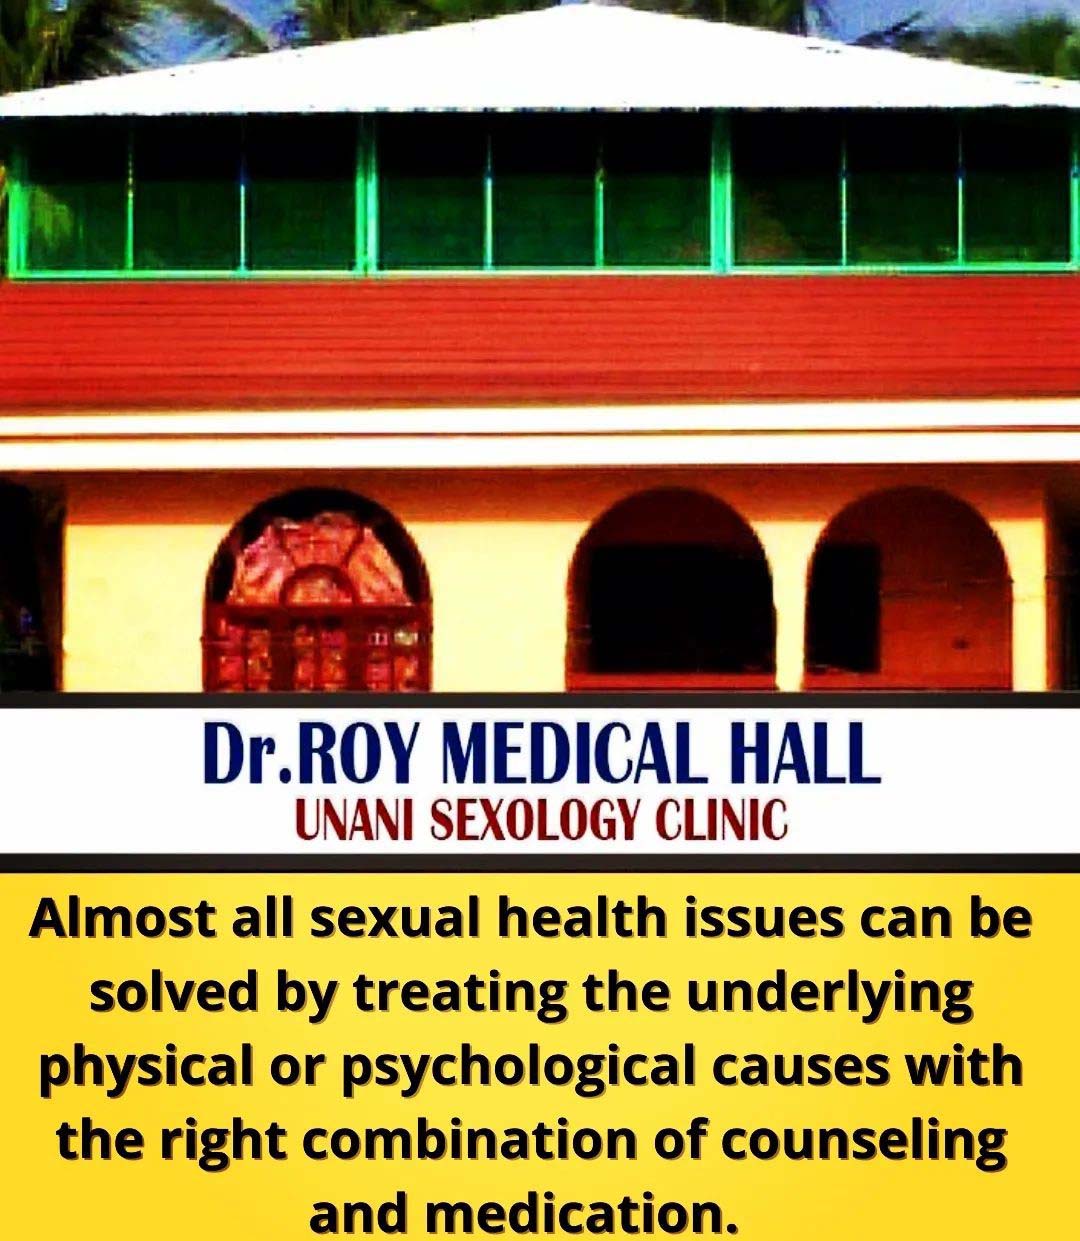 Therapy for Sexual Weakness, Premature Ejaculation, Nocturnal Emission, Spermatorrhea, Loss of Libido, Sexologist Doctor, Sexology Clinic, Dr. Roy Medical Hall